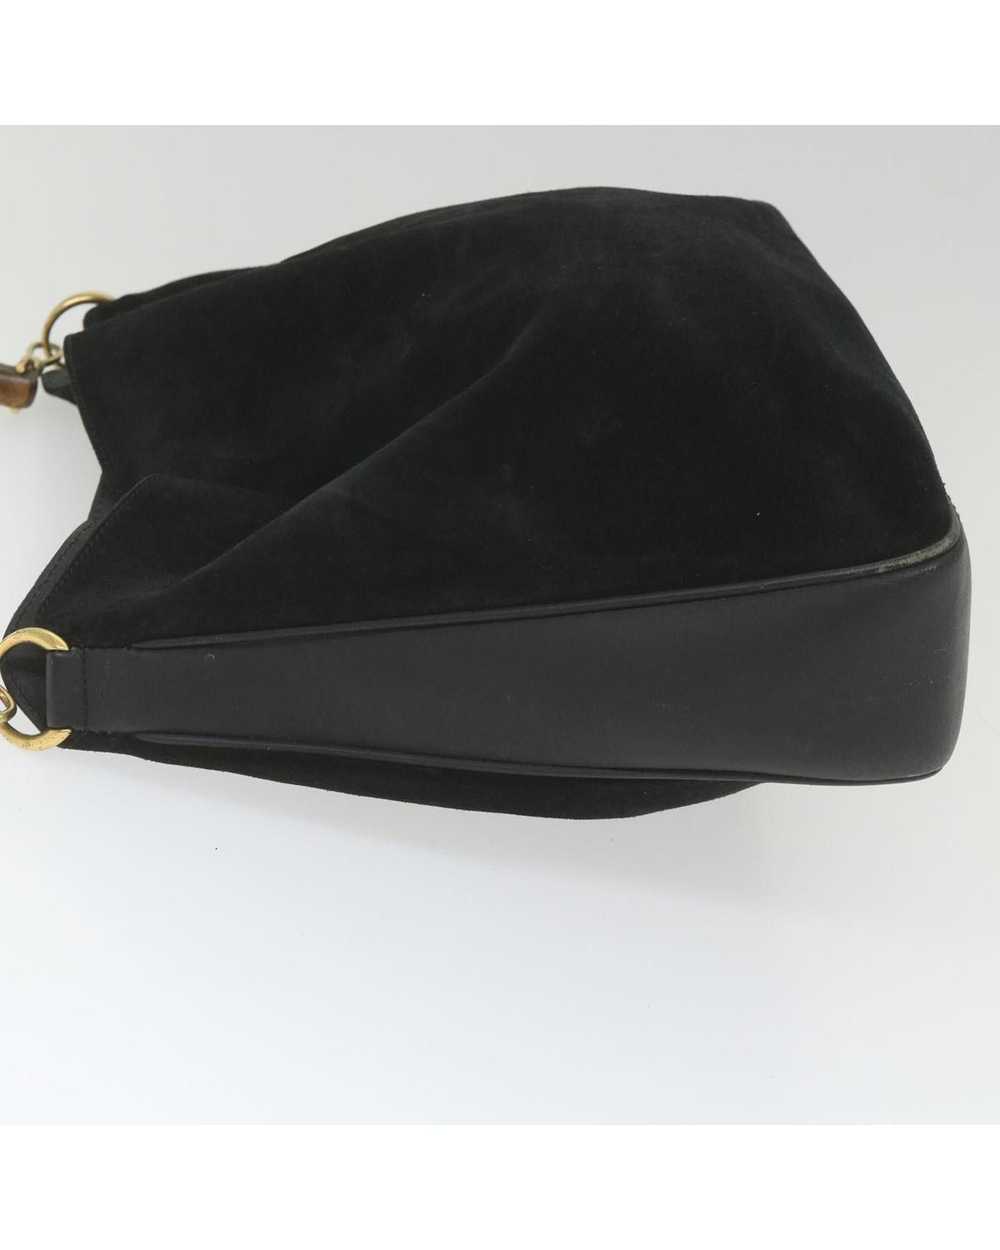 Gucci Black Suede Shoulder Bag with Bamboo Handle - image 5